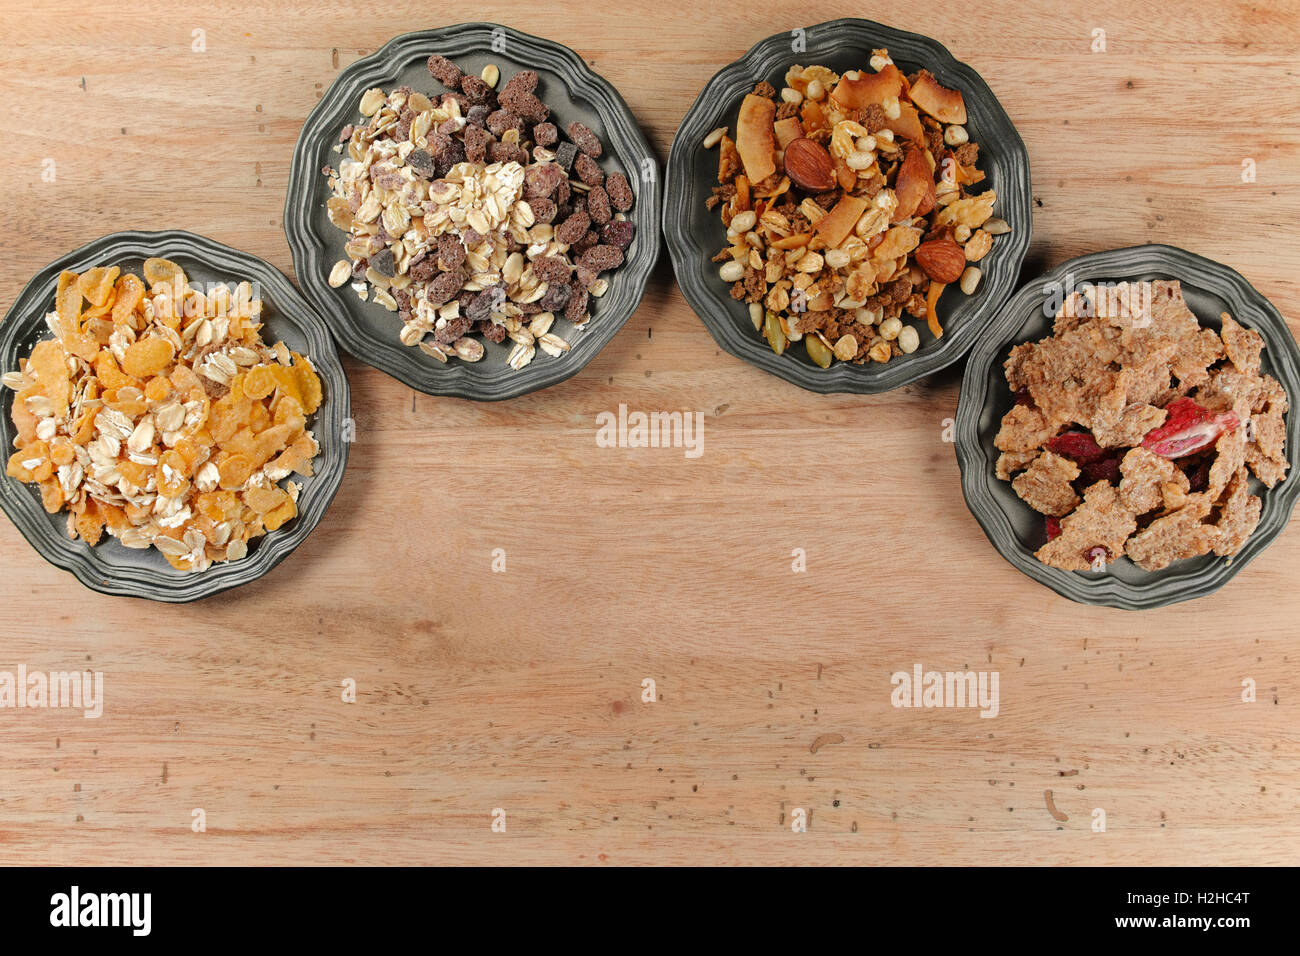 Delicious mix granola muesli cereal with fruits and nuts, healthy eating concept Stock Photo